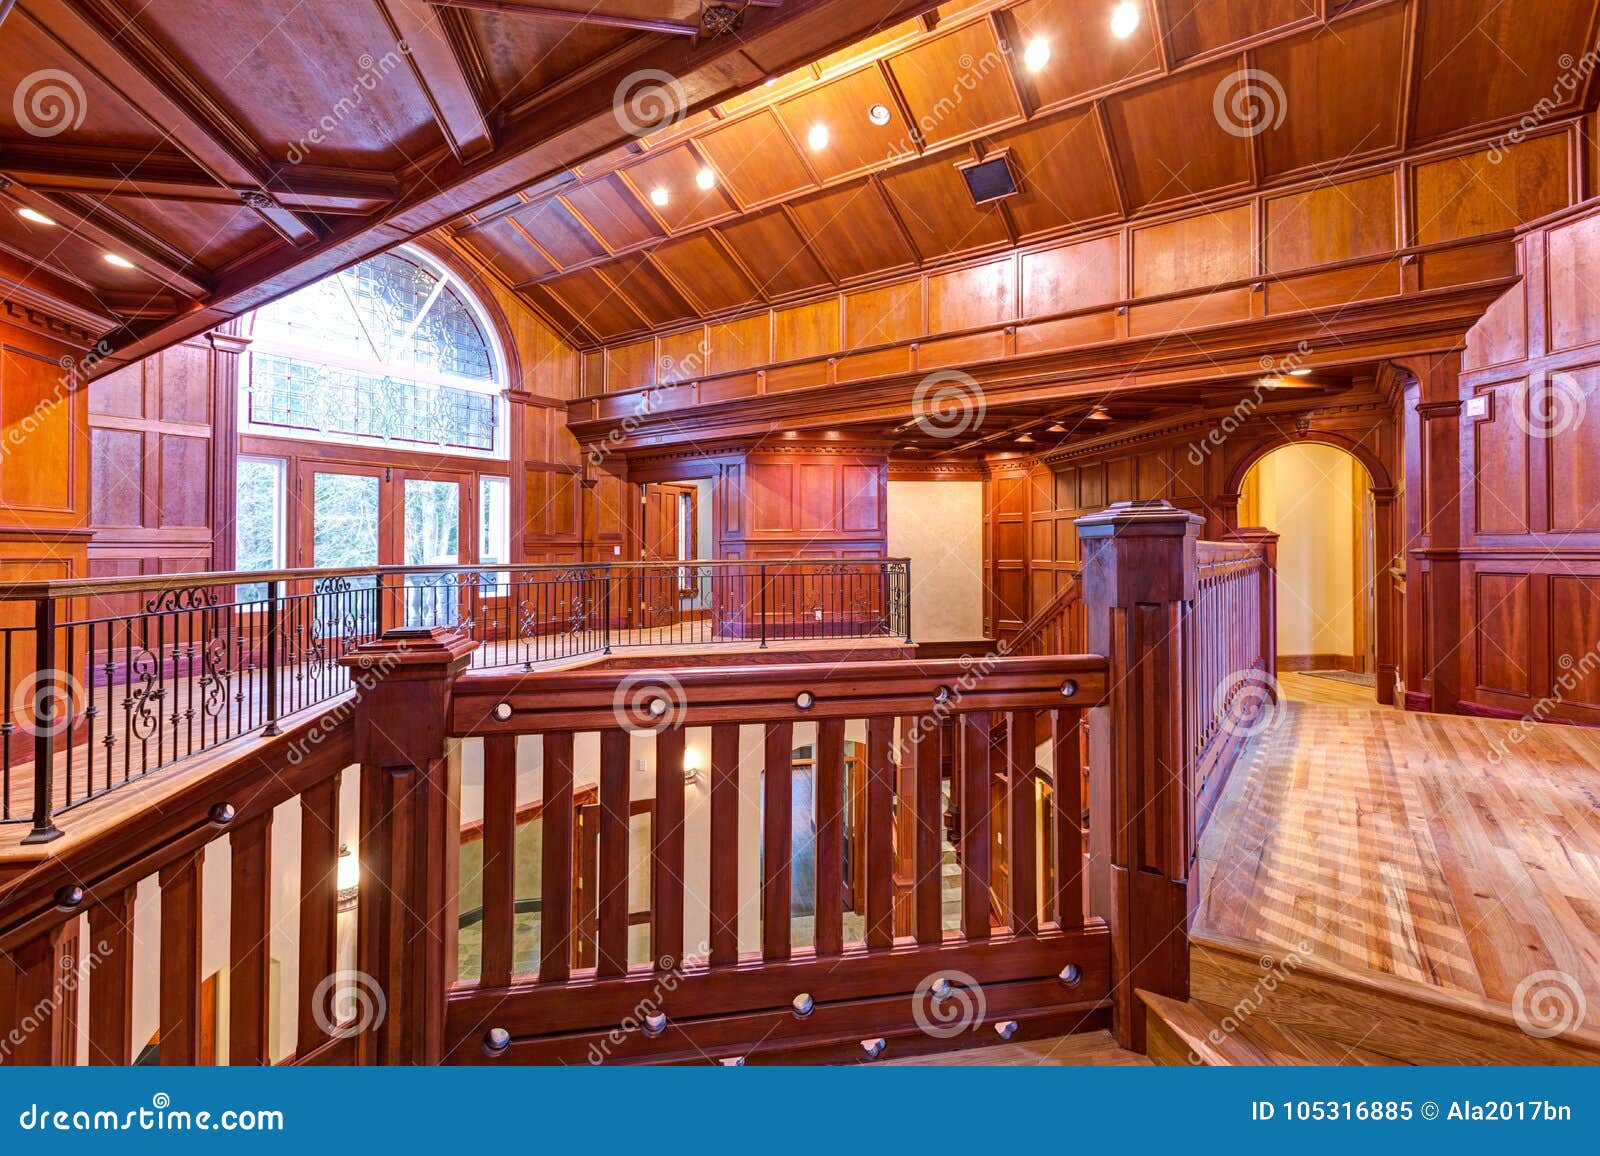 Second Floor Landing Accented With Wood Paneled Walls And